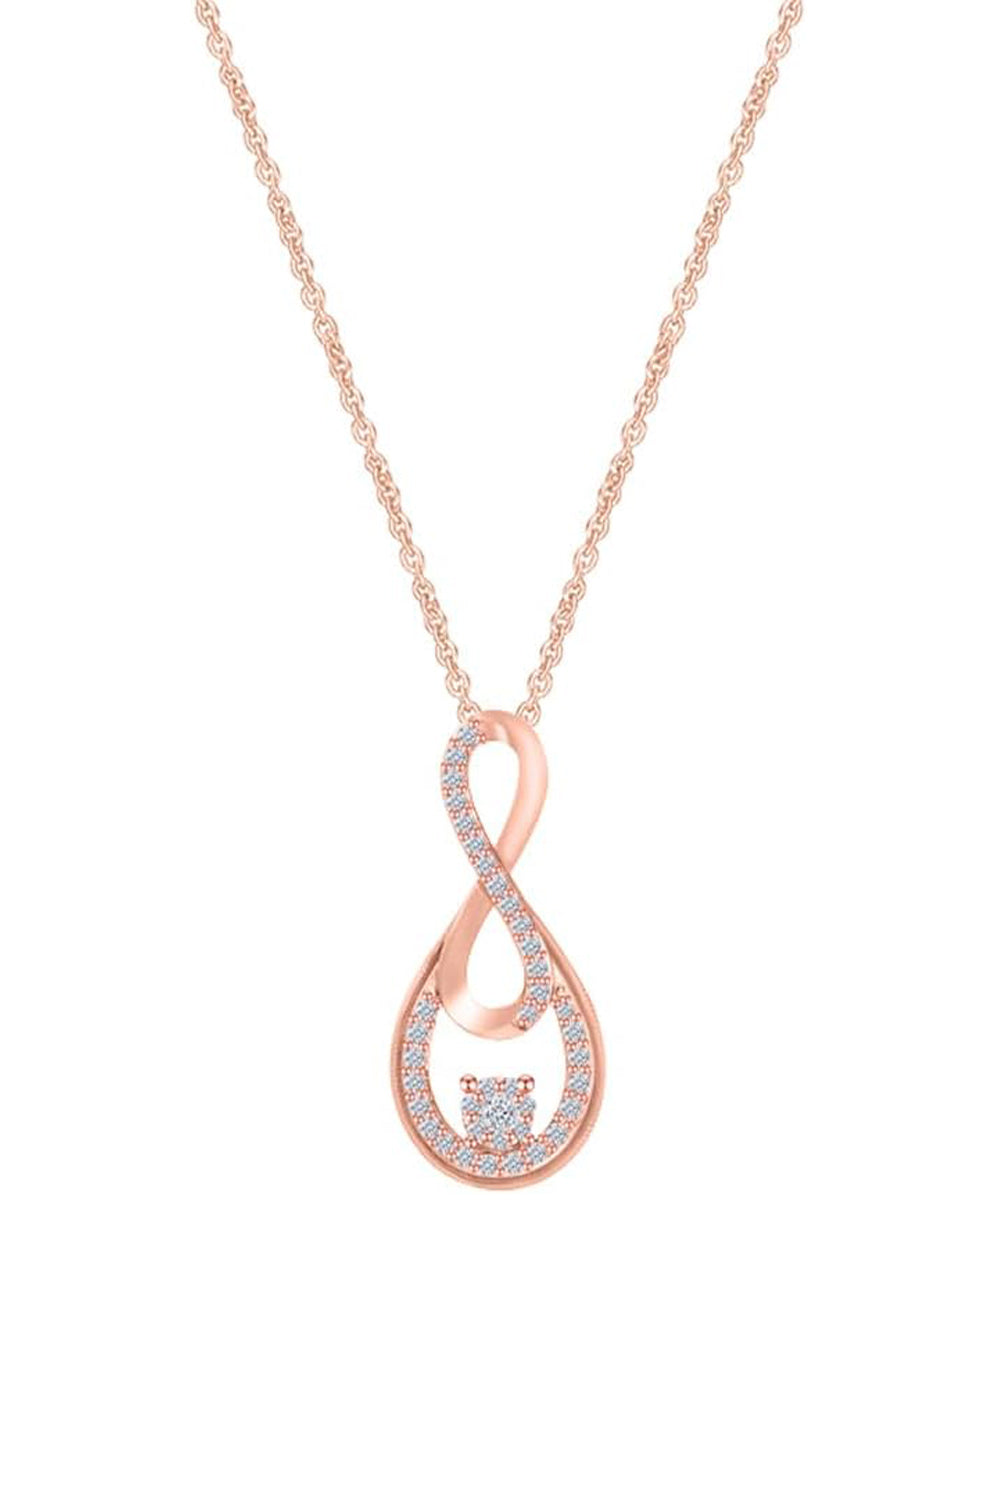 Rose Gold Color Yaathi Double Infinity Pendant Necklace, Pendants Online 